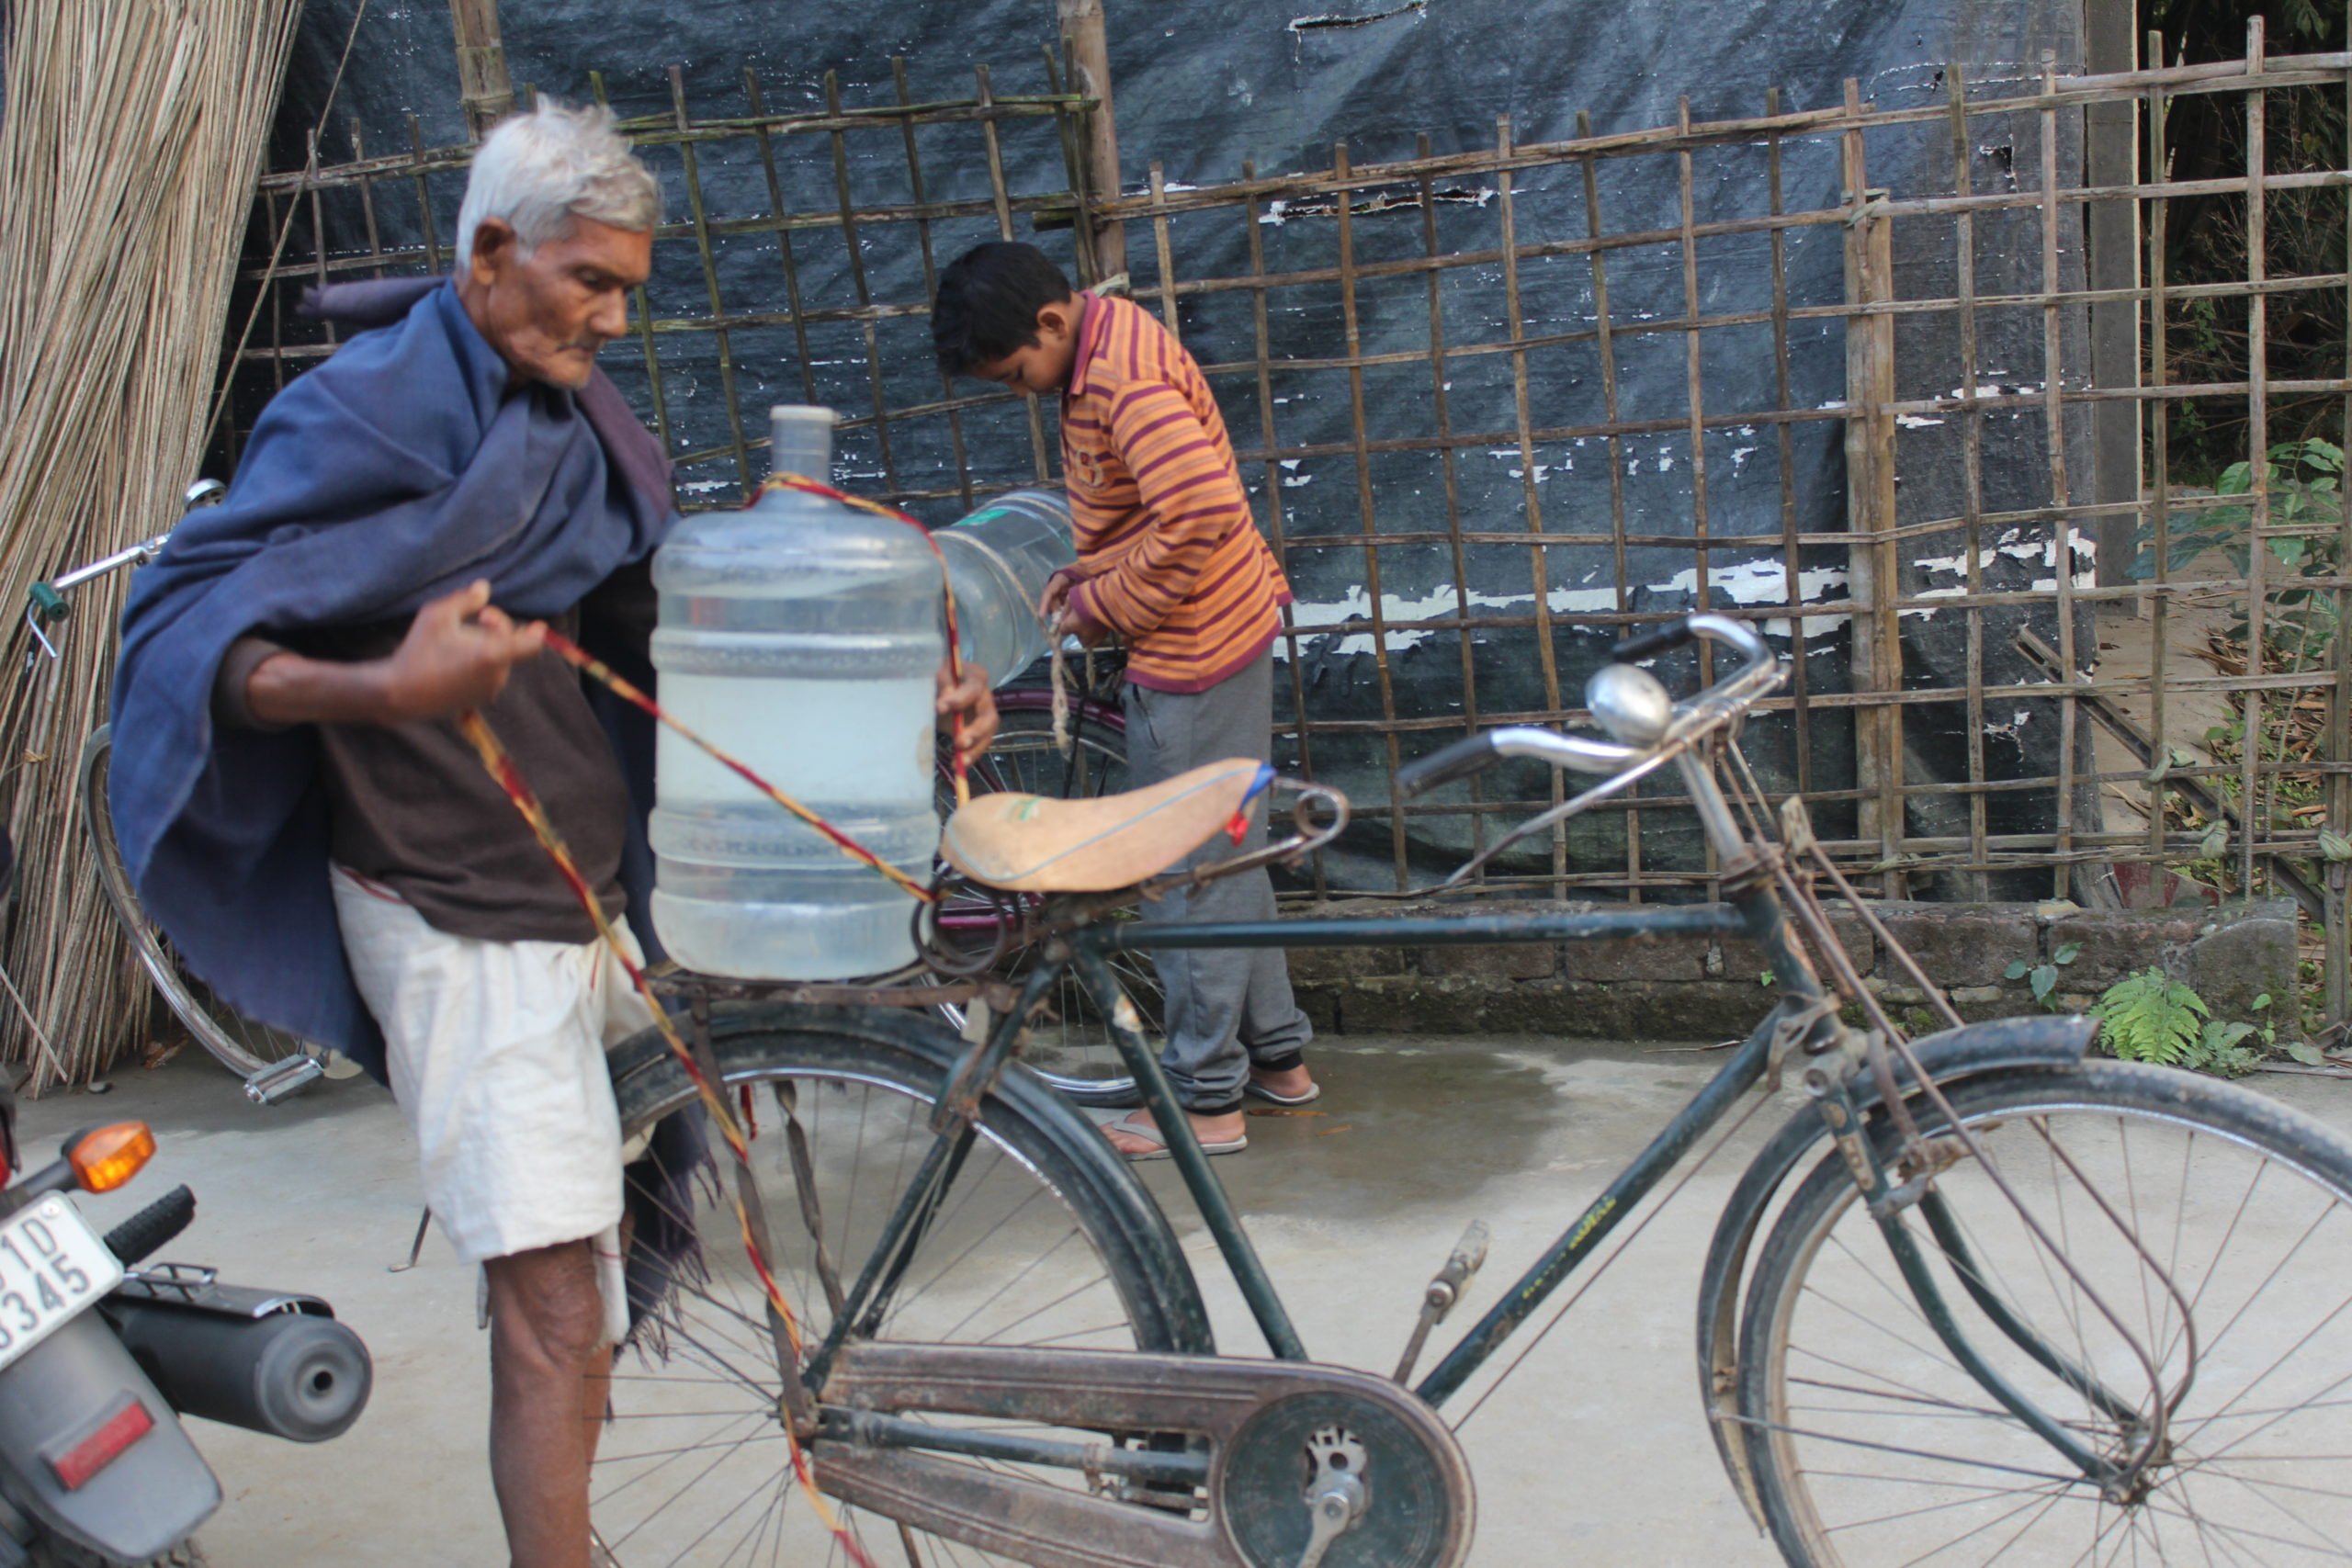 Villagers strap filled water containers onto their bikes, Jitu Kalita, GVM